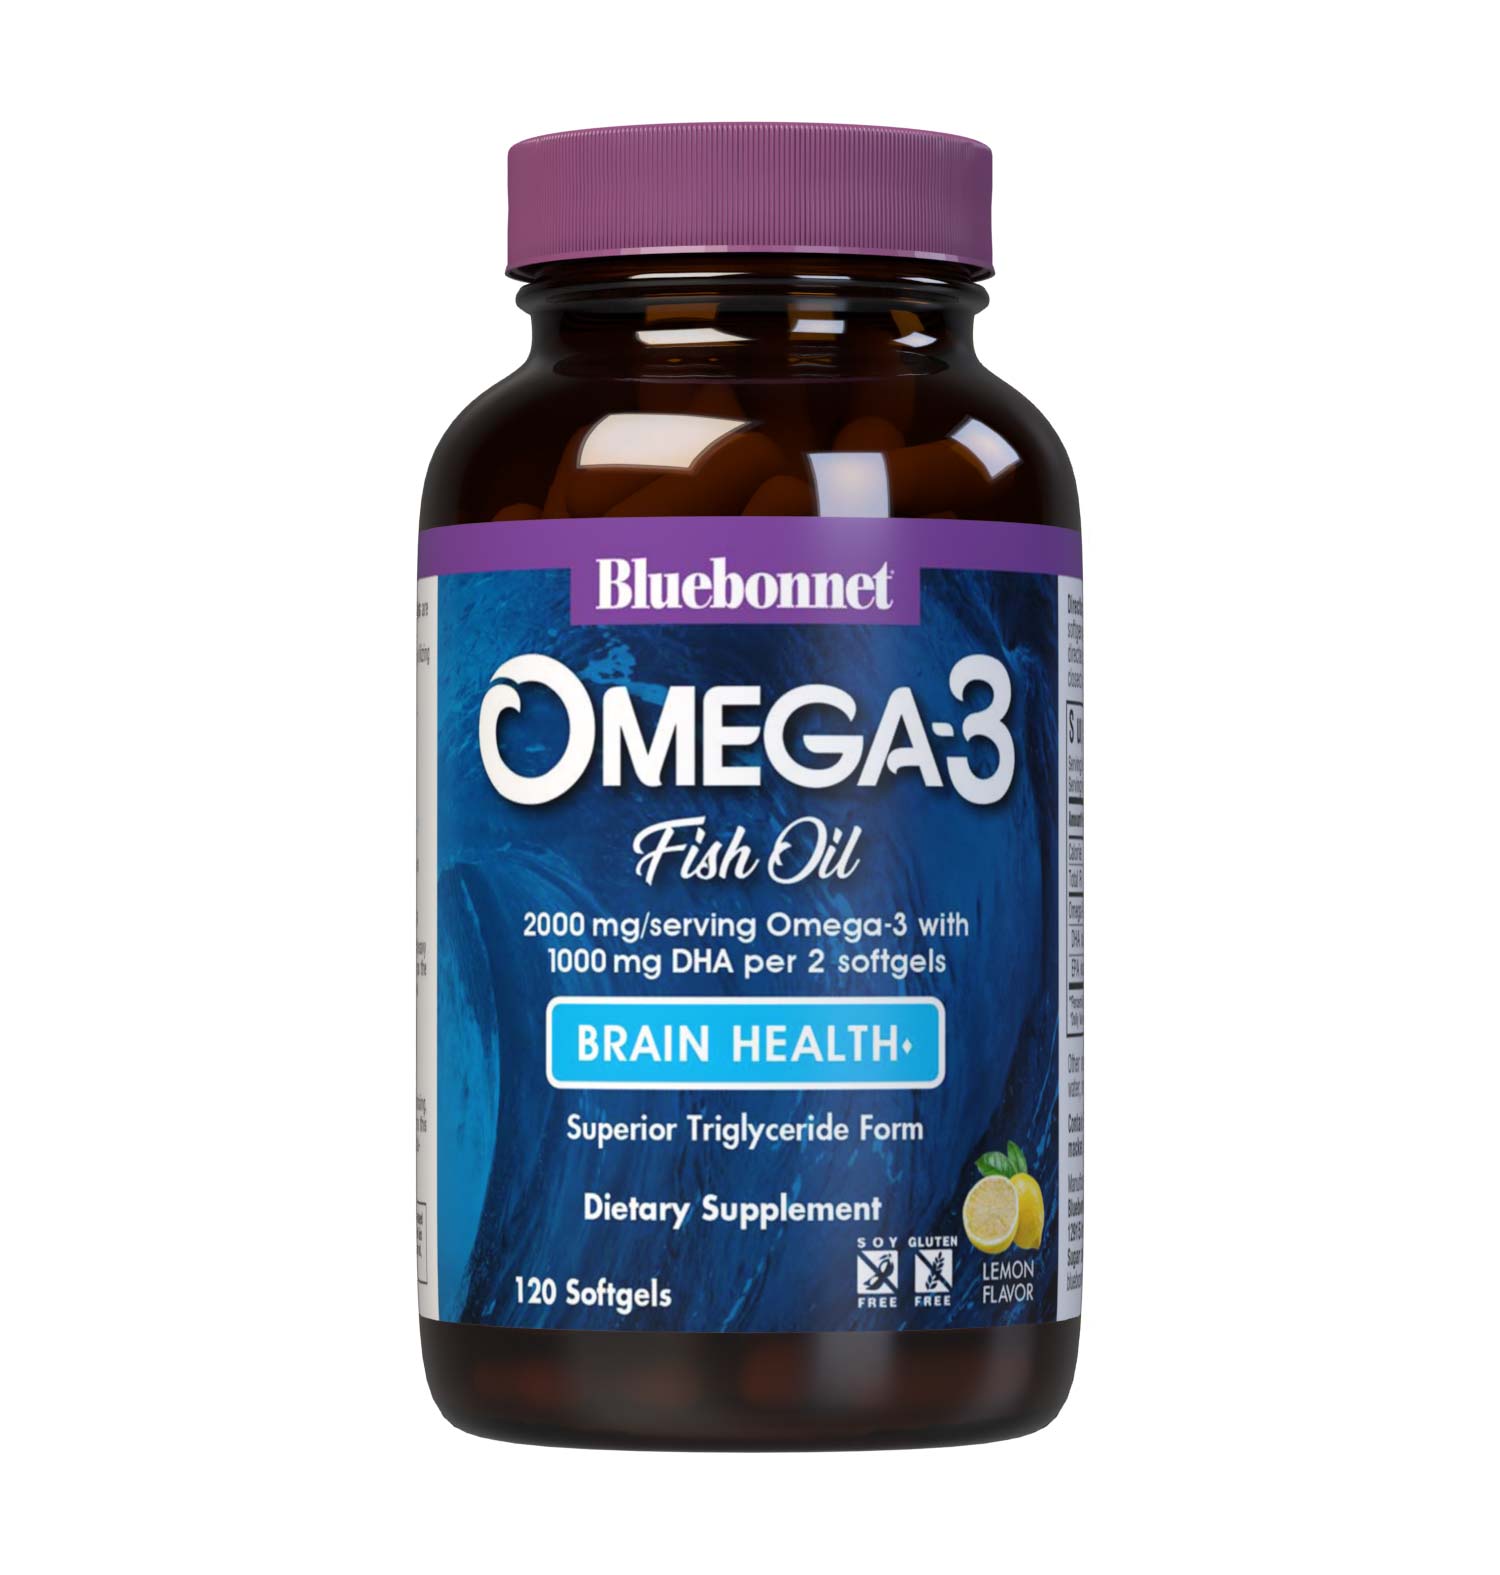 Bluebonnet’s Omega-3 Fish Oil Brain Health 120 Softgels are formulated with a specific ratio of DHA and EPA to help support brain function, mood, and focus by utilizing ultra-refined omega-3s from wild-caught fish. #size_120 count